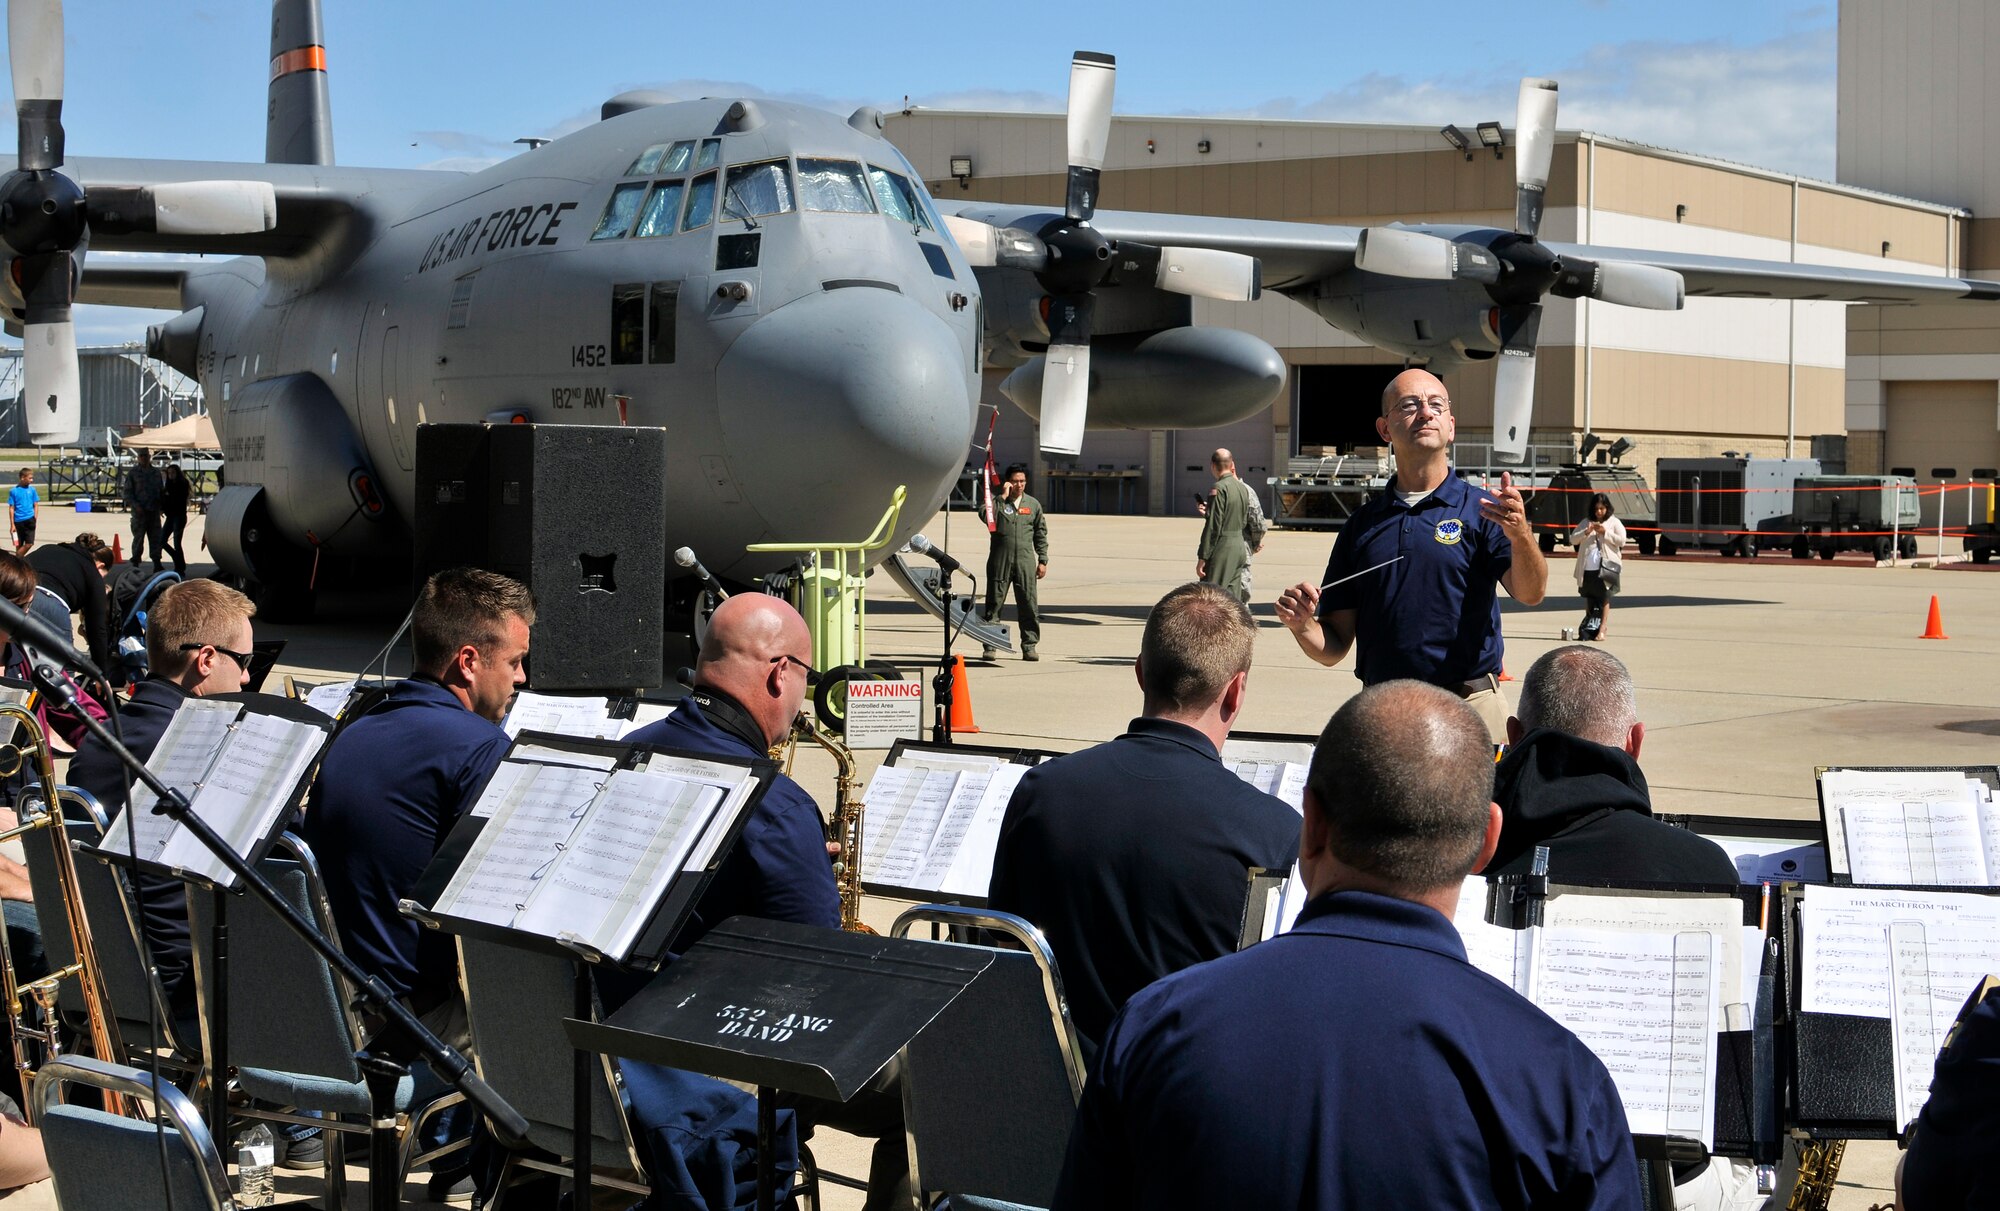 U.S. Air Force Lt. Col. Bryan M. Miller, commander of the 566th Air Force Band, Illinois Air National Guard, conducts a performance during Wingman and Family Day at the 182nd Airlift Wing, Peoria, Ill., Sept. 12, 2015. The event was organized to promote resiliency in Airmen and their friends and family. (U.S. Air National Guard photo by Staff Sgt. Lealan Buehrer/Released)